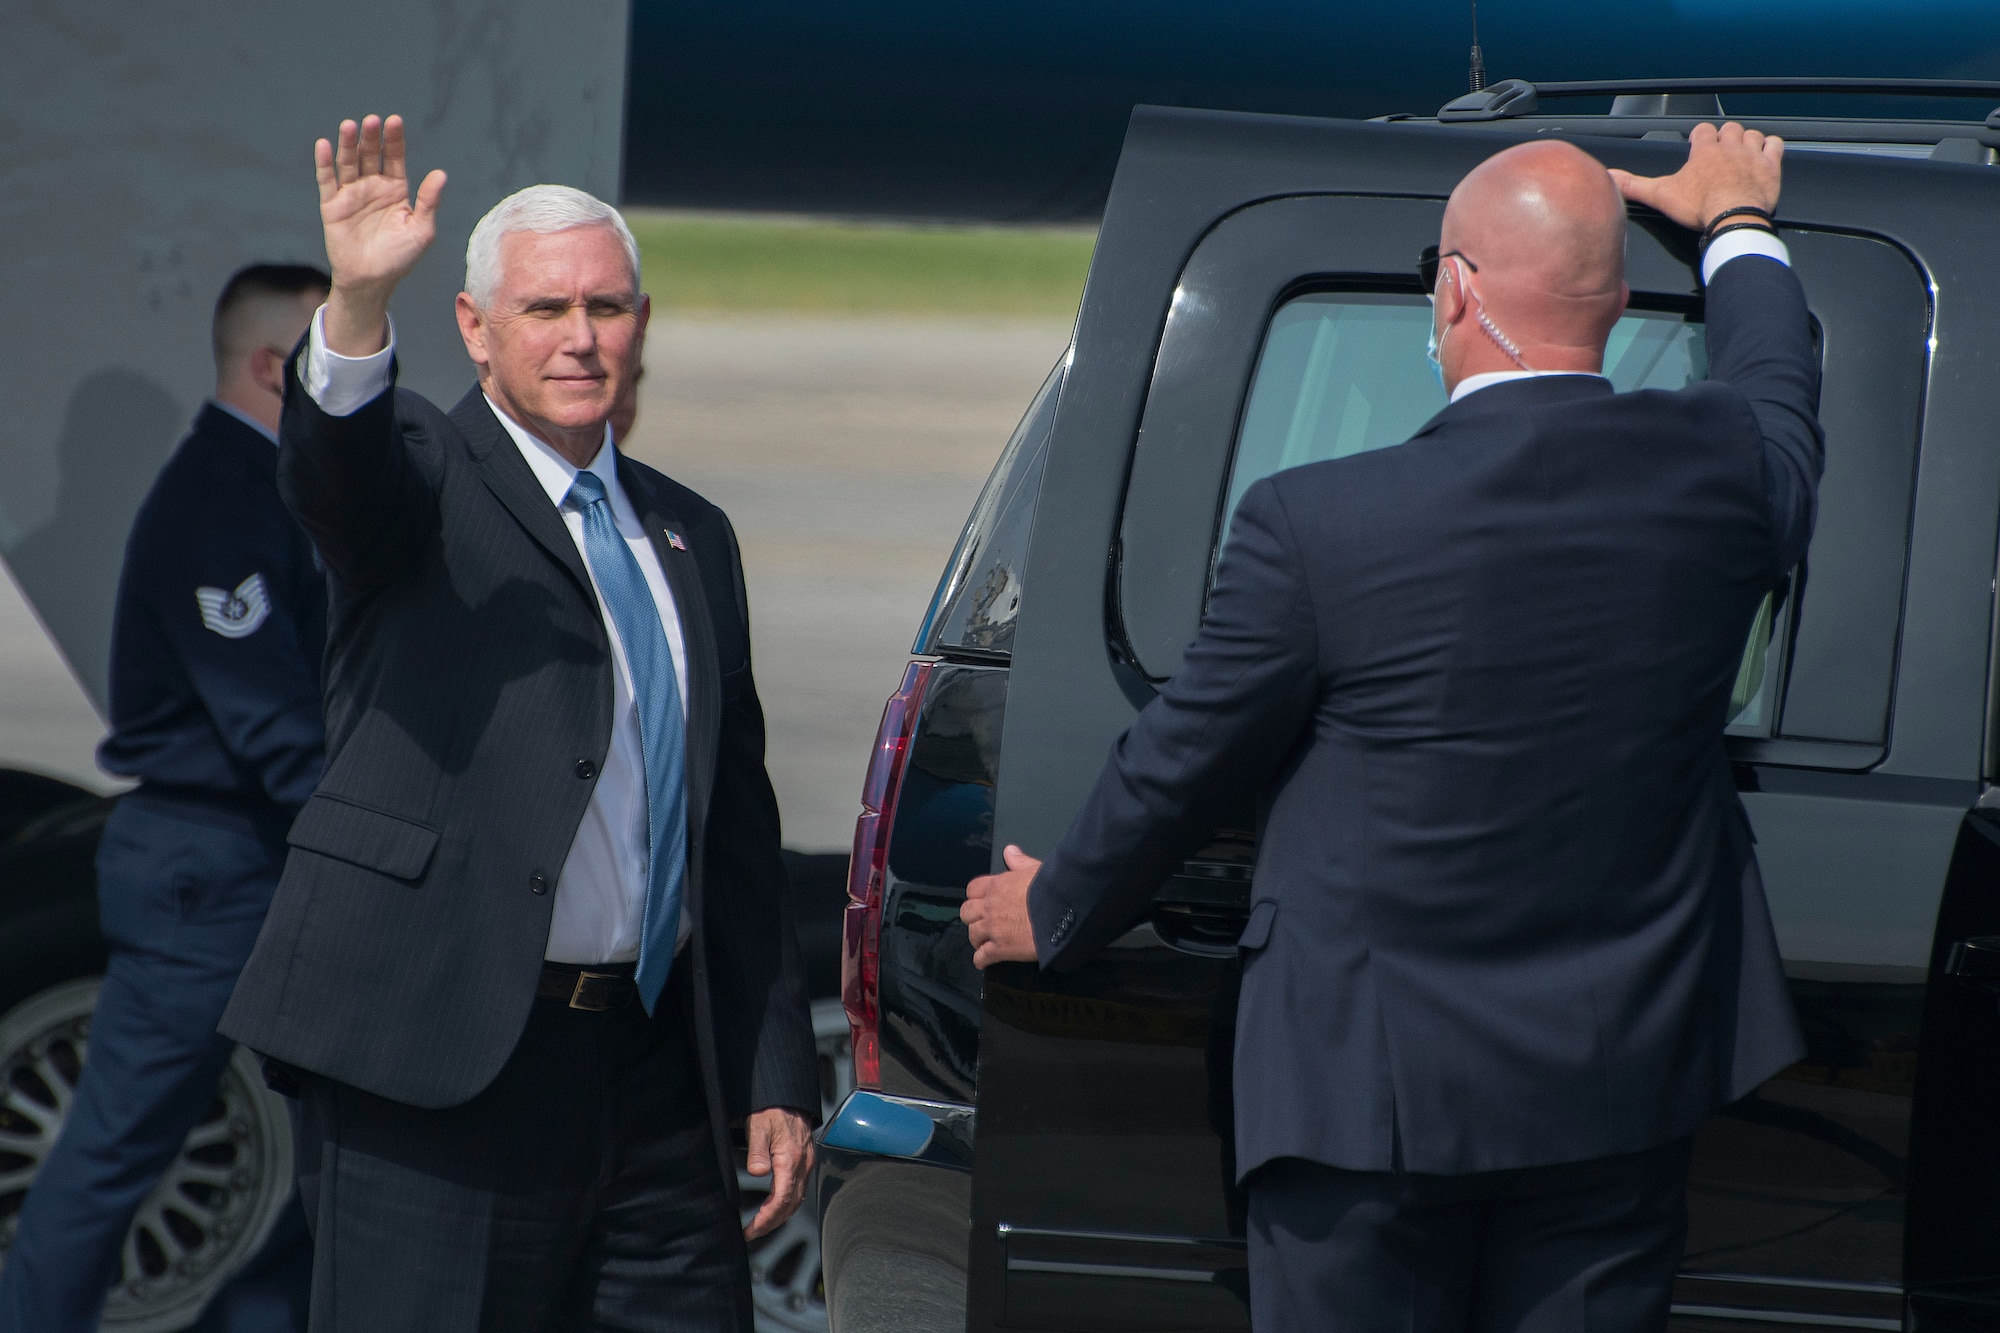 Vice President Michael Pence waves to the media before entering his vehicle in the motorcade at Dobbins Air Reserve Base, Ga. on May 29, 2020. Air Force Two landed here around 10 a.m., marking the second time in two weeks the vice president has visited Georgia. (U.S. Air Force photo/Andrew Park)